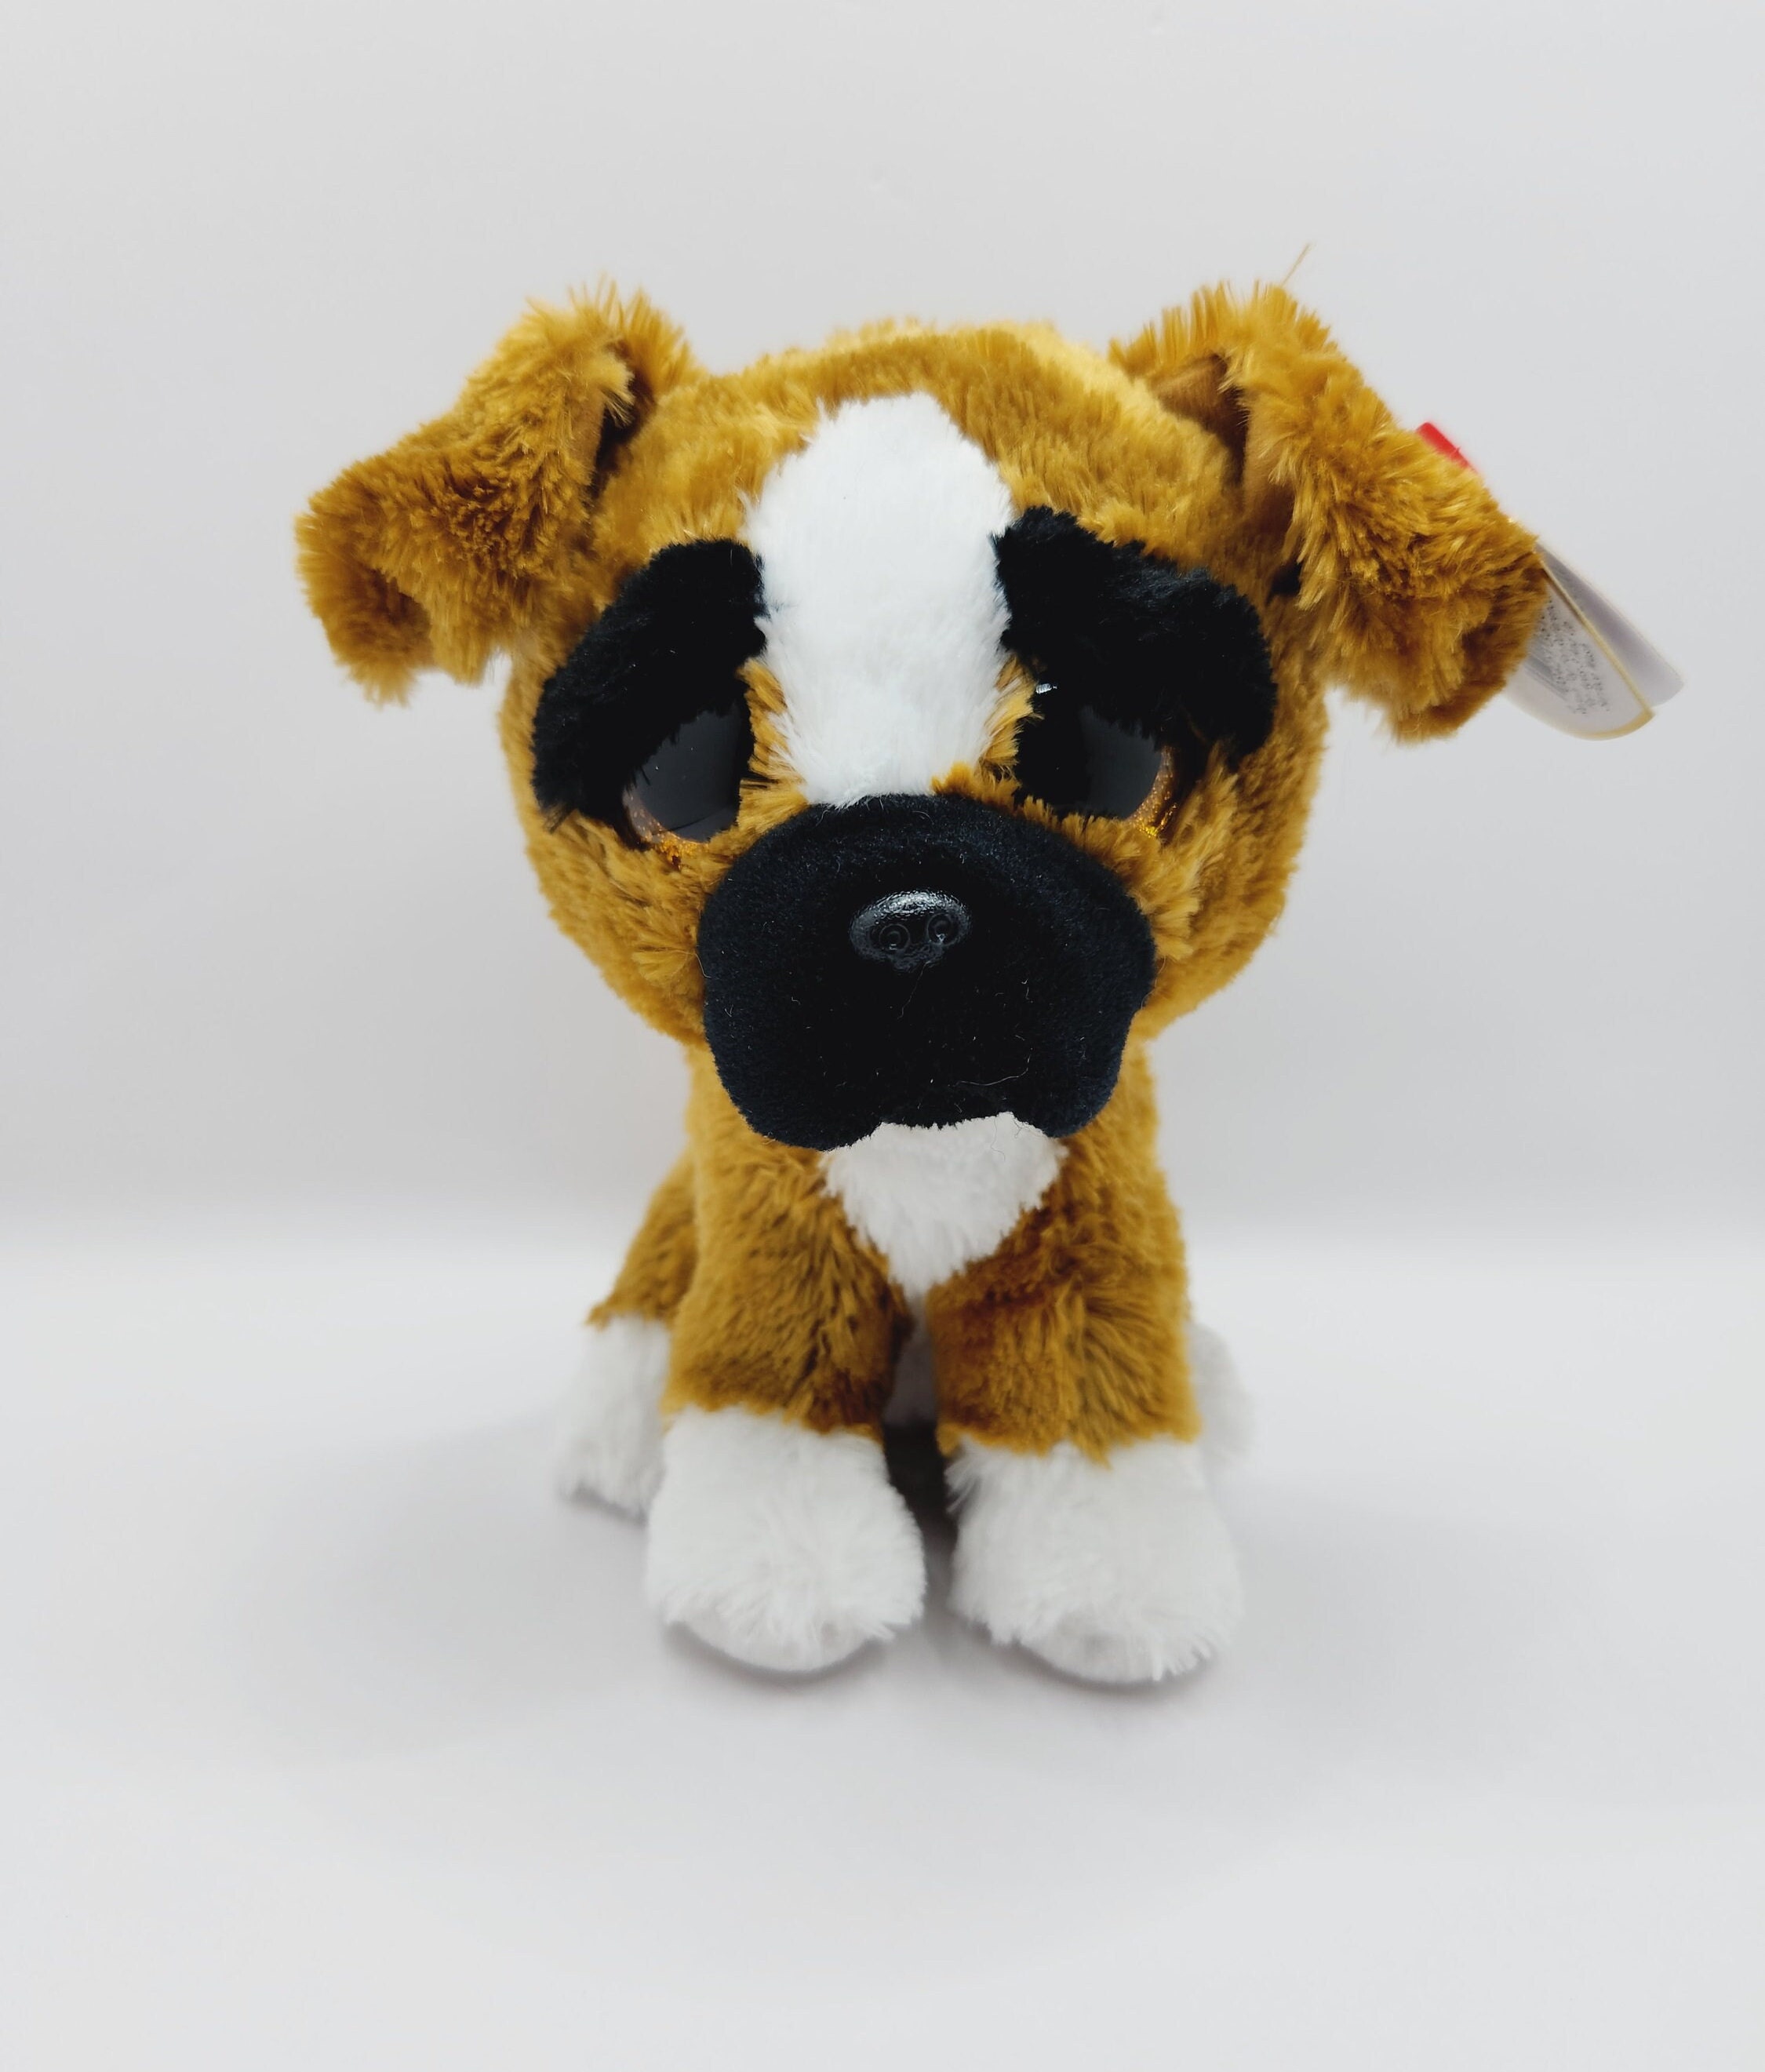 Bob The Boxer | Over 2 1/2 Foot Long Big Stuffed Animal Plush Dog | Shipping from Texas | by Tiger Tale Toys